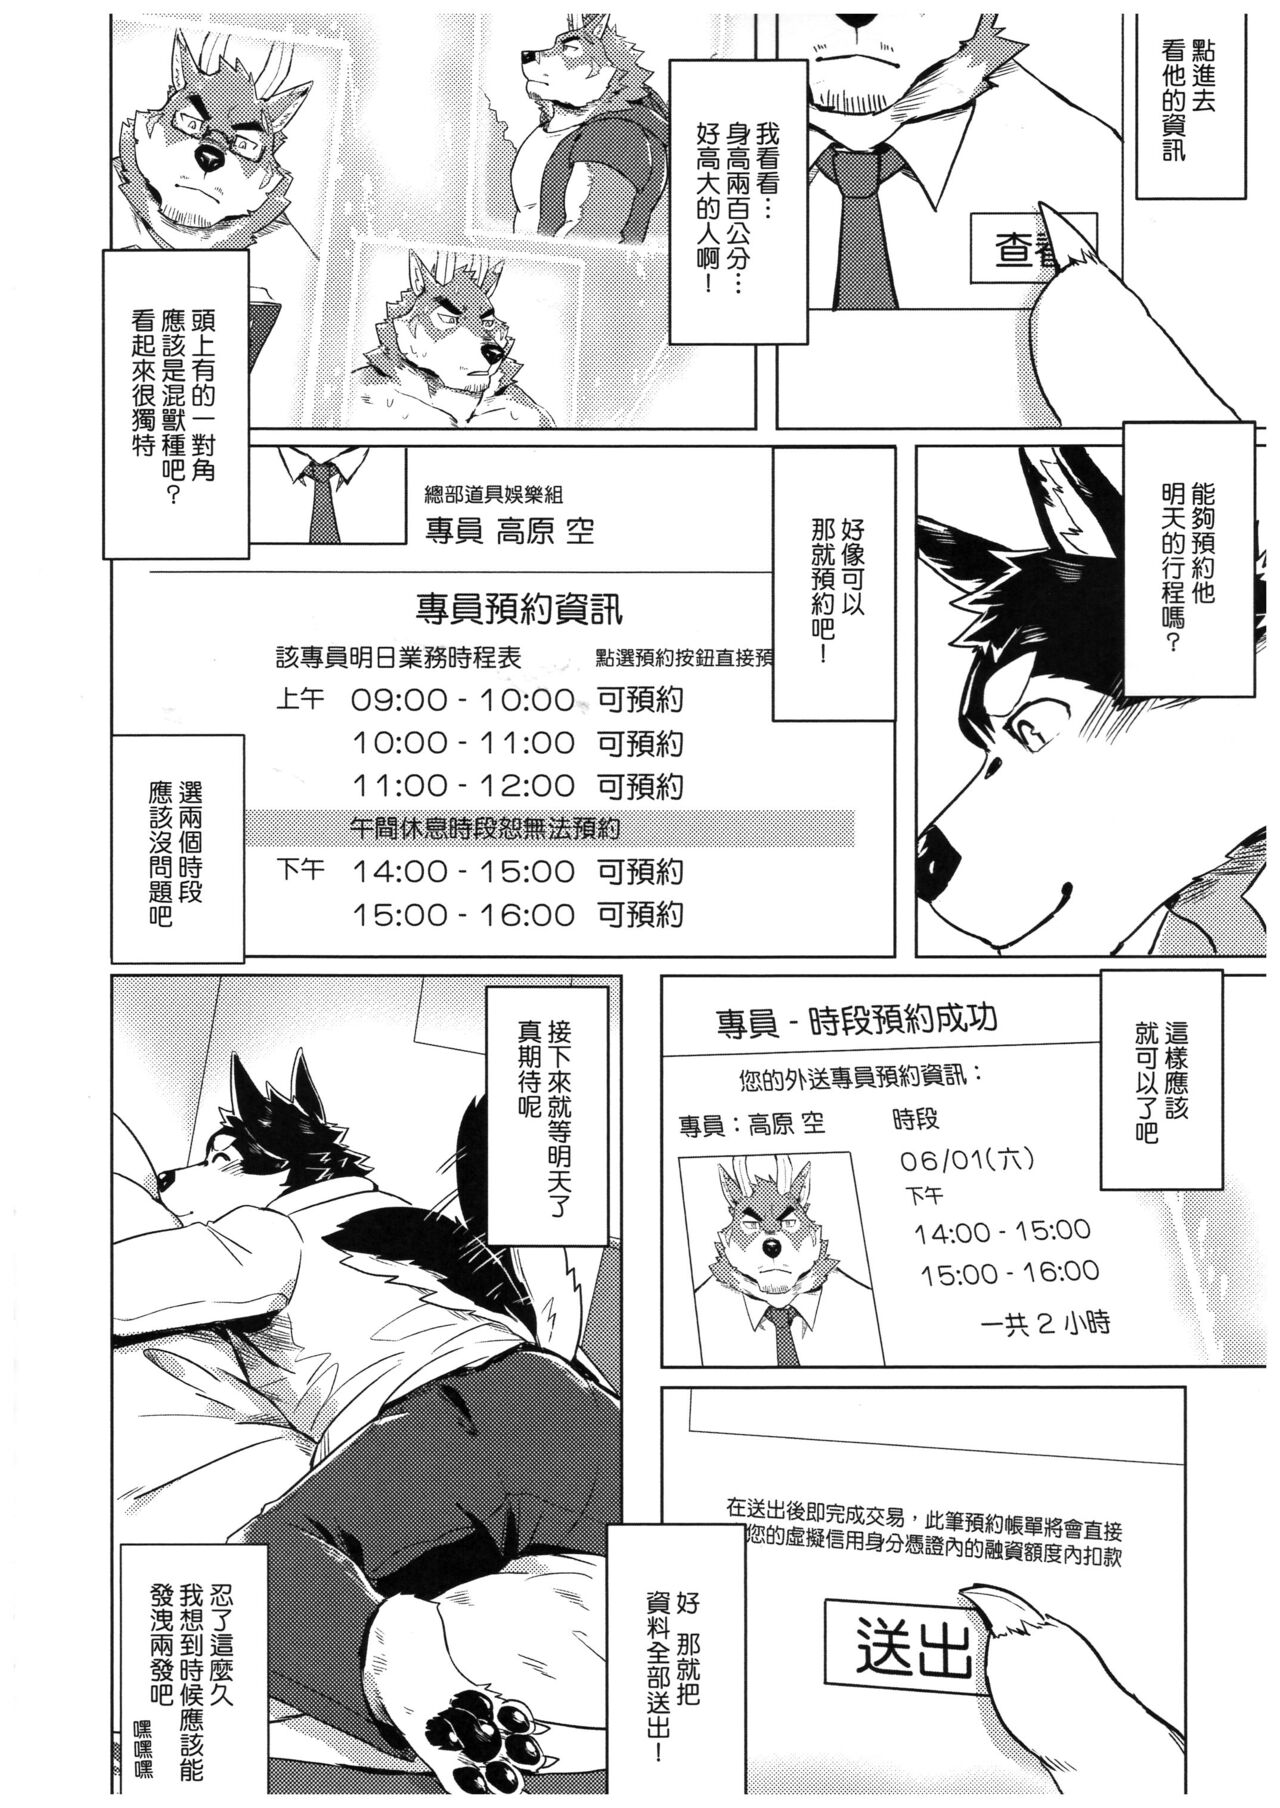 [Taki_Kaze] Special Order Delivery vol.2 (Chinese) [塔吉風] 特殊外送服務 vol.2 (中國語)